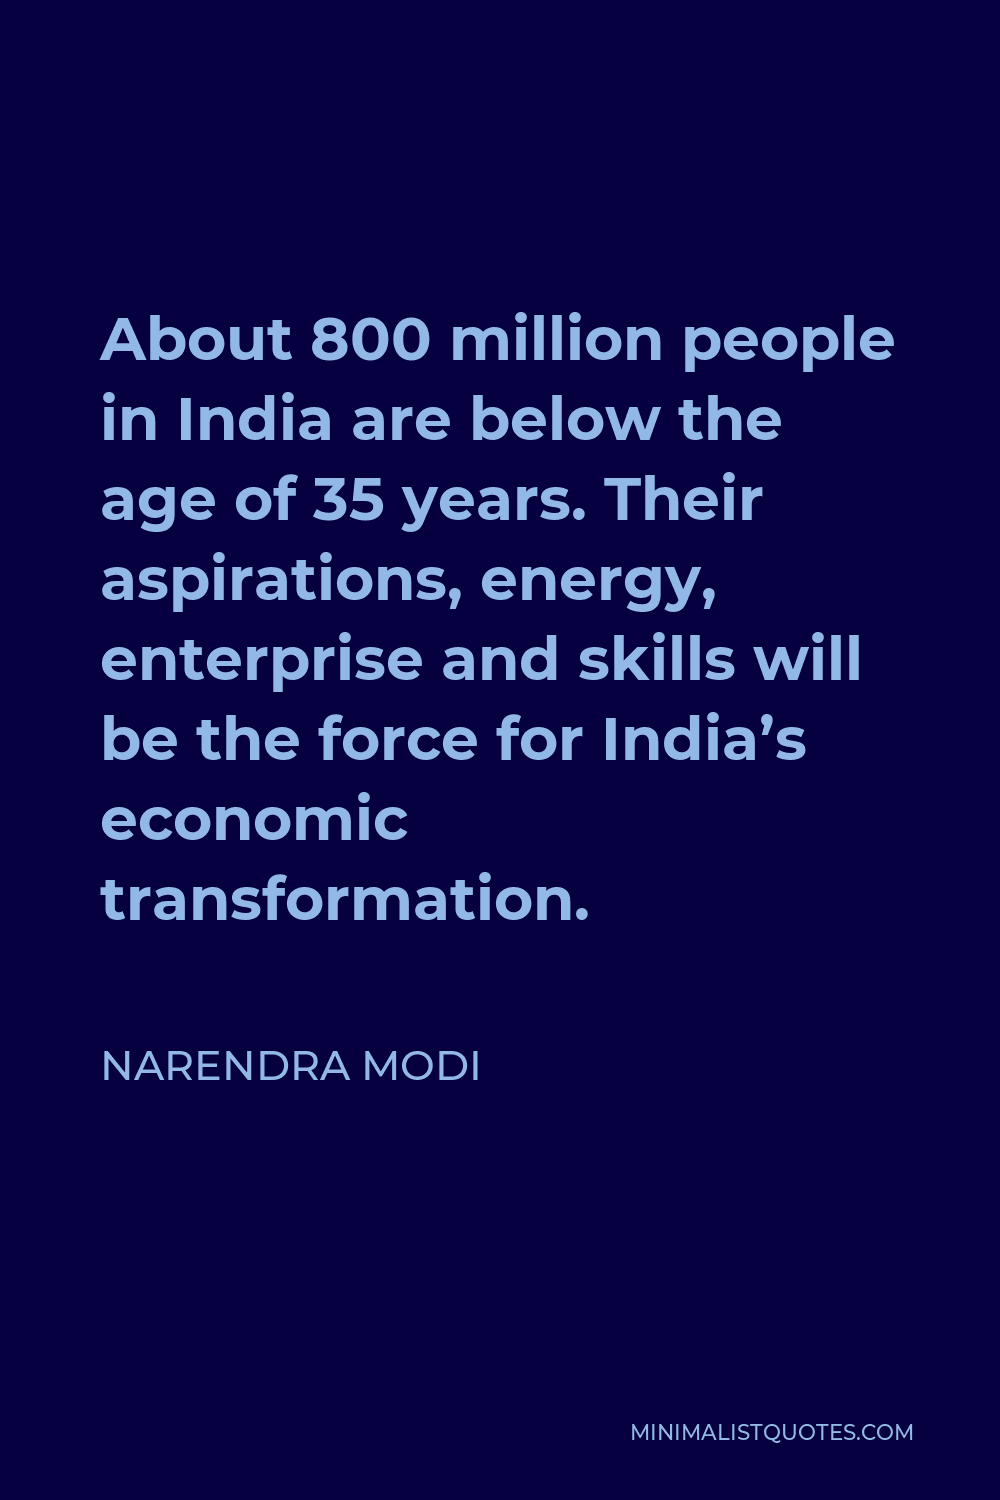 Narendra Modi Quote - About 800 million people in India are below the age of 35 years. Their aspirations, energy, enterprise and skills will be the force for India’s economic transformation.